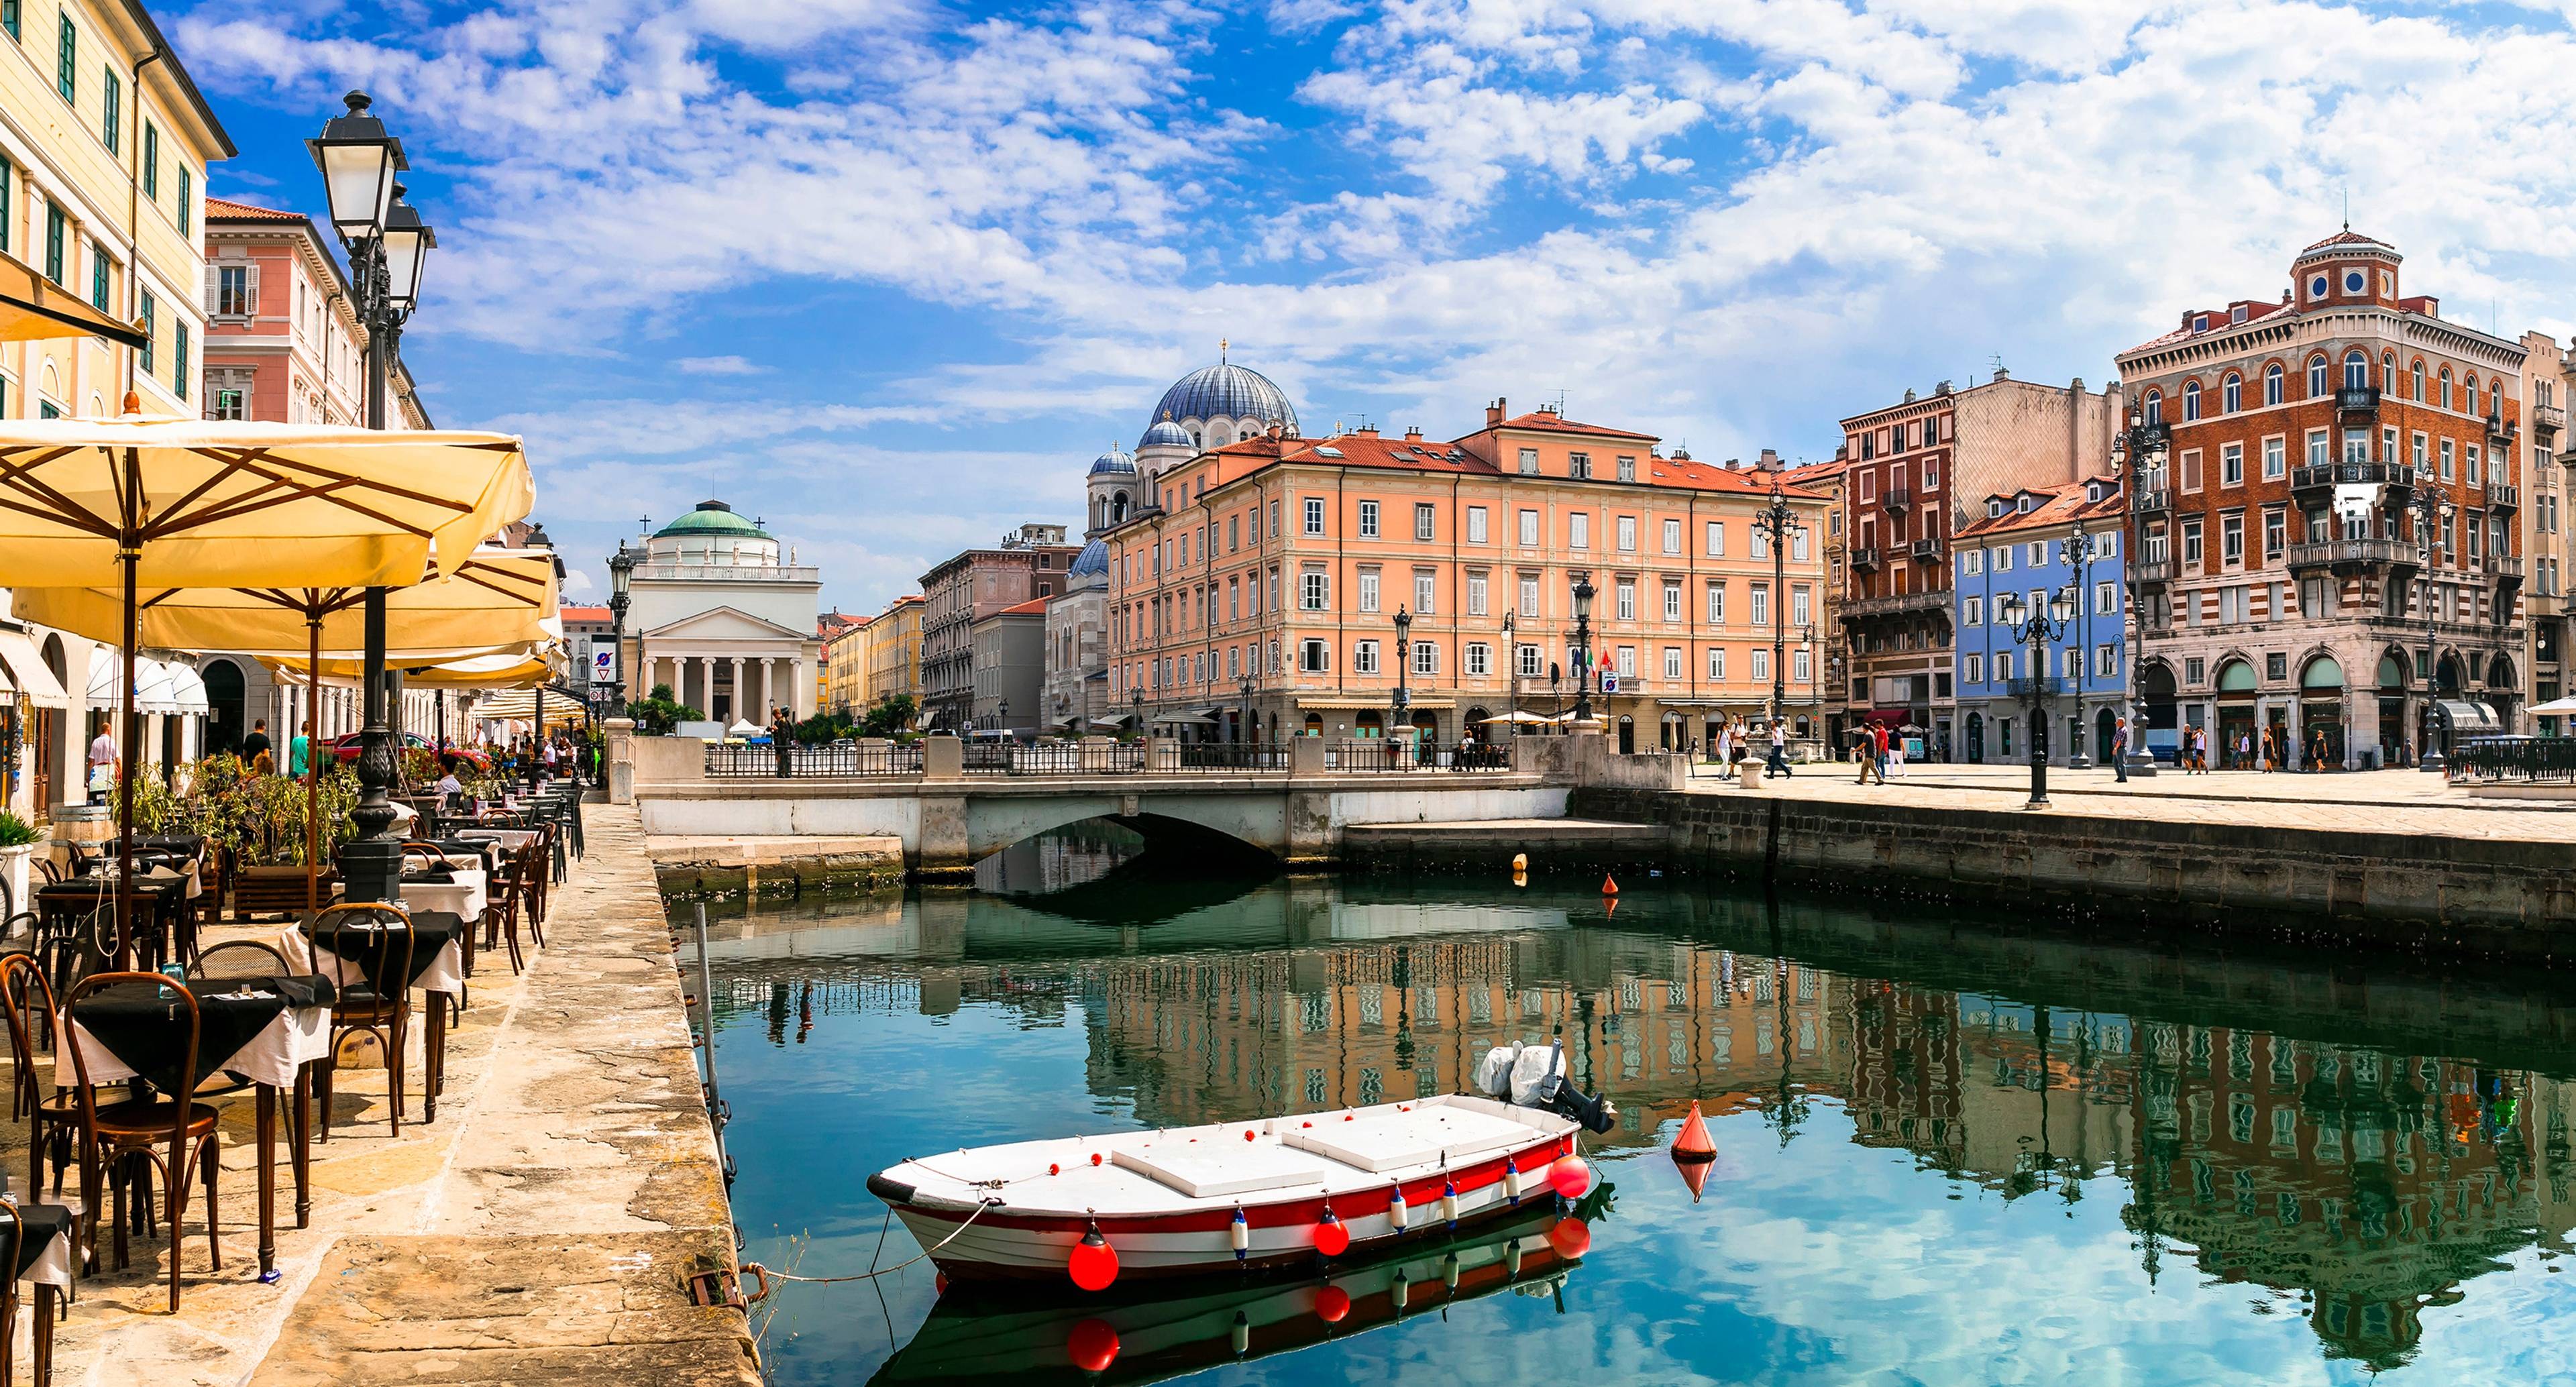 The Beautiful City of Trieste